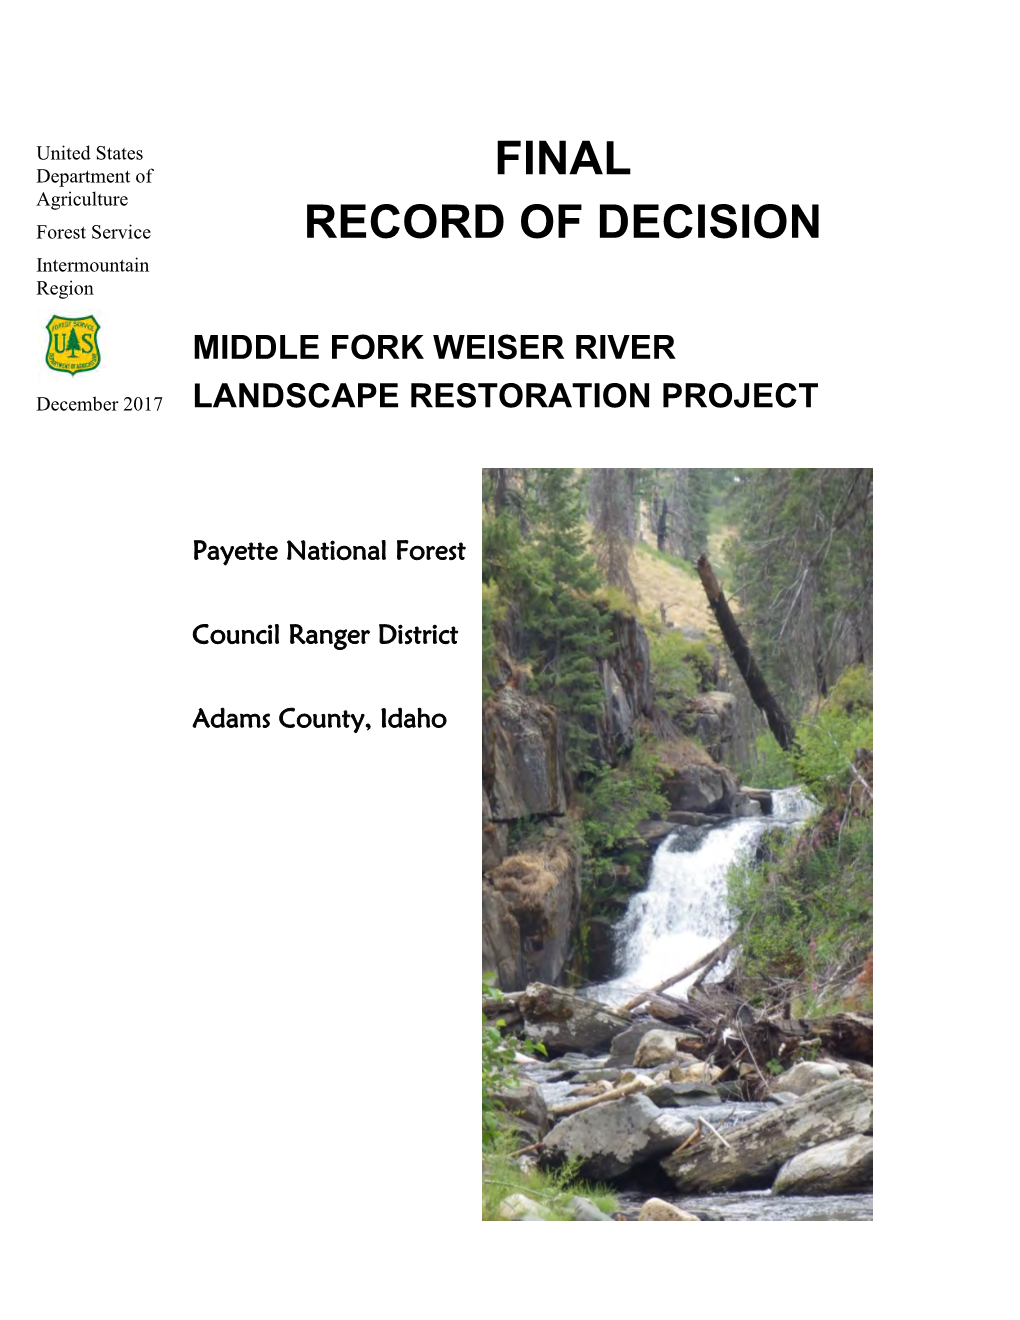 FINAL Record of Decision Middle Fork Weiser River Landscape Restoration Project Council Ranger District Payette National Forest Adams County, Idaho December 2017